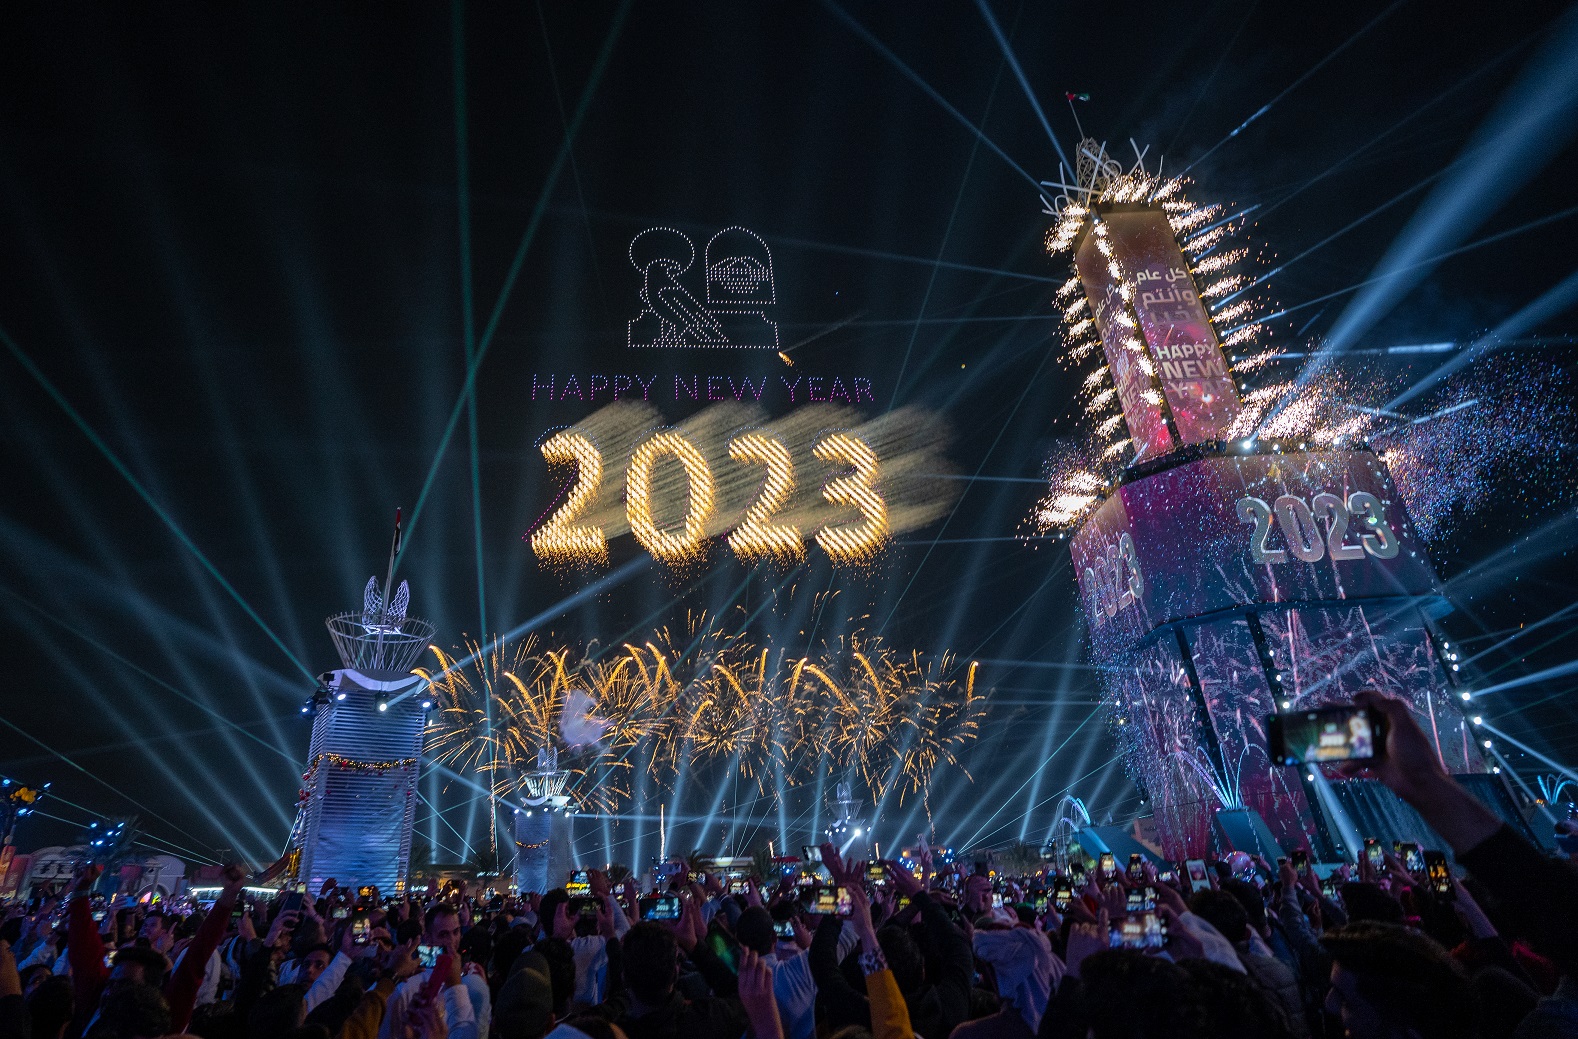 Sheikh Zayed Festival Breaks Four Guinness World Records Welcoming The New Year Of 2023